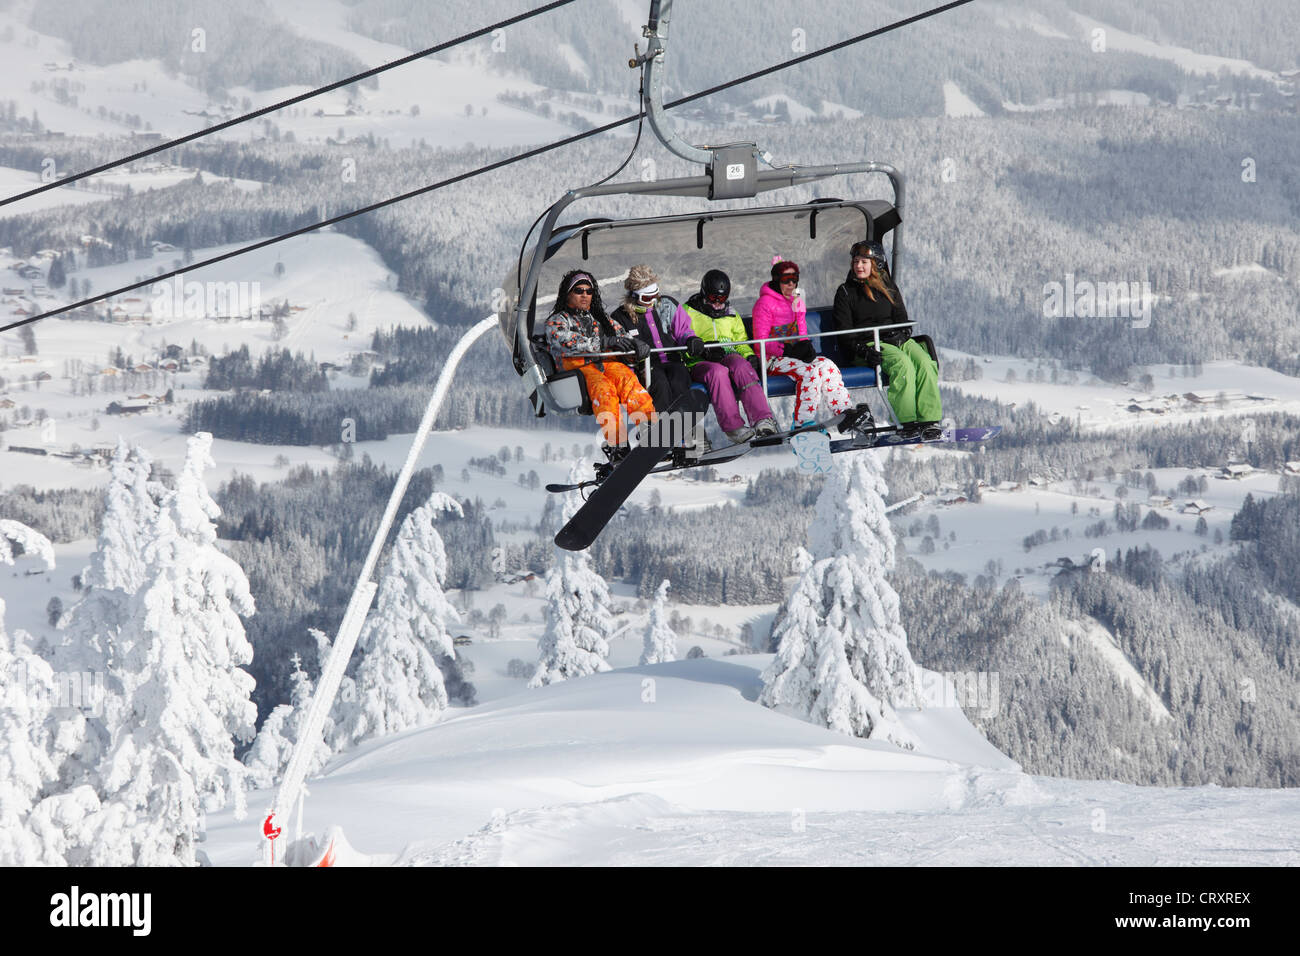 Austria, Styria, Schladminger Tauern, People in chair lift Stock Photo